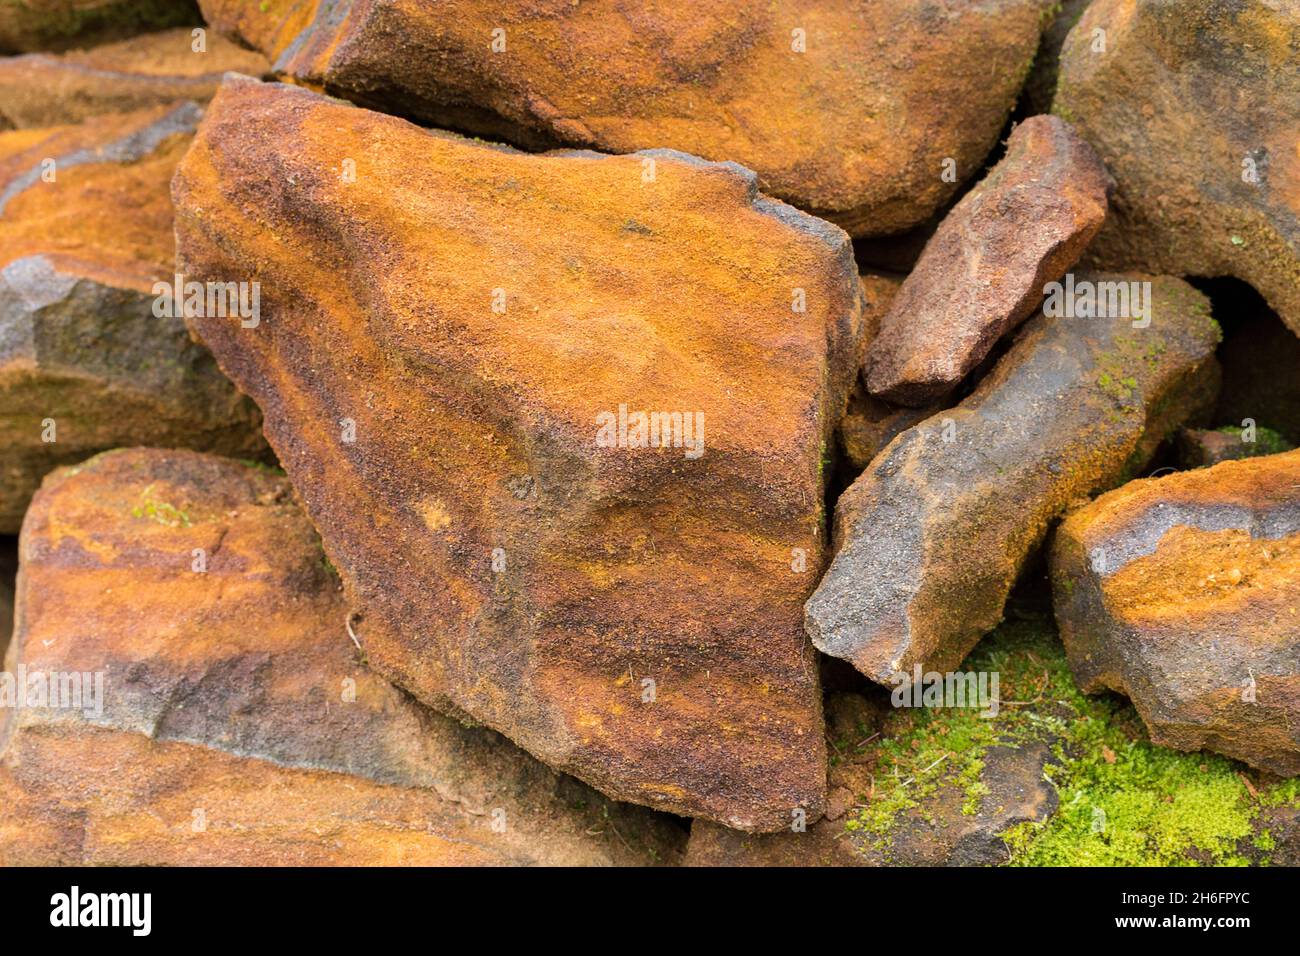 Iron stone sedimentary rock mineral deposits with iron ore (FE) used for smelting commercially to make iron metal. Banded silver to black red chert Stock Photo